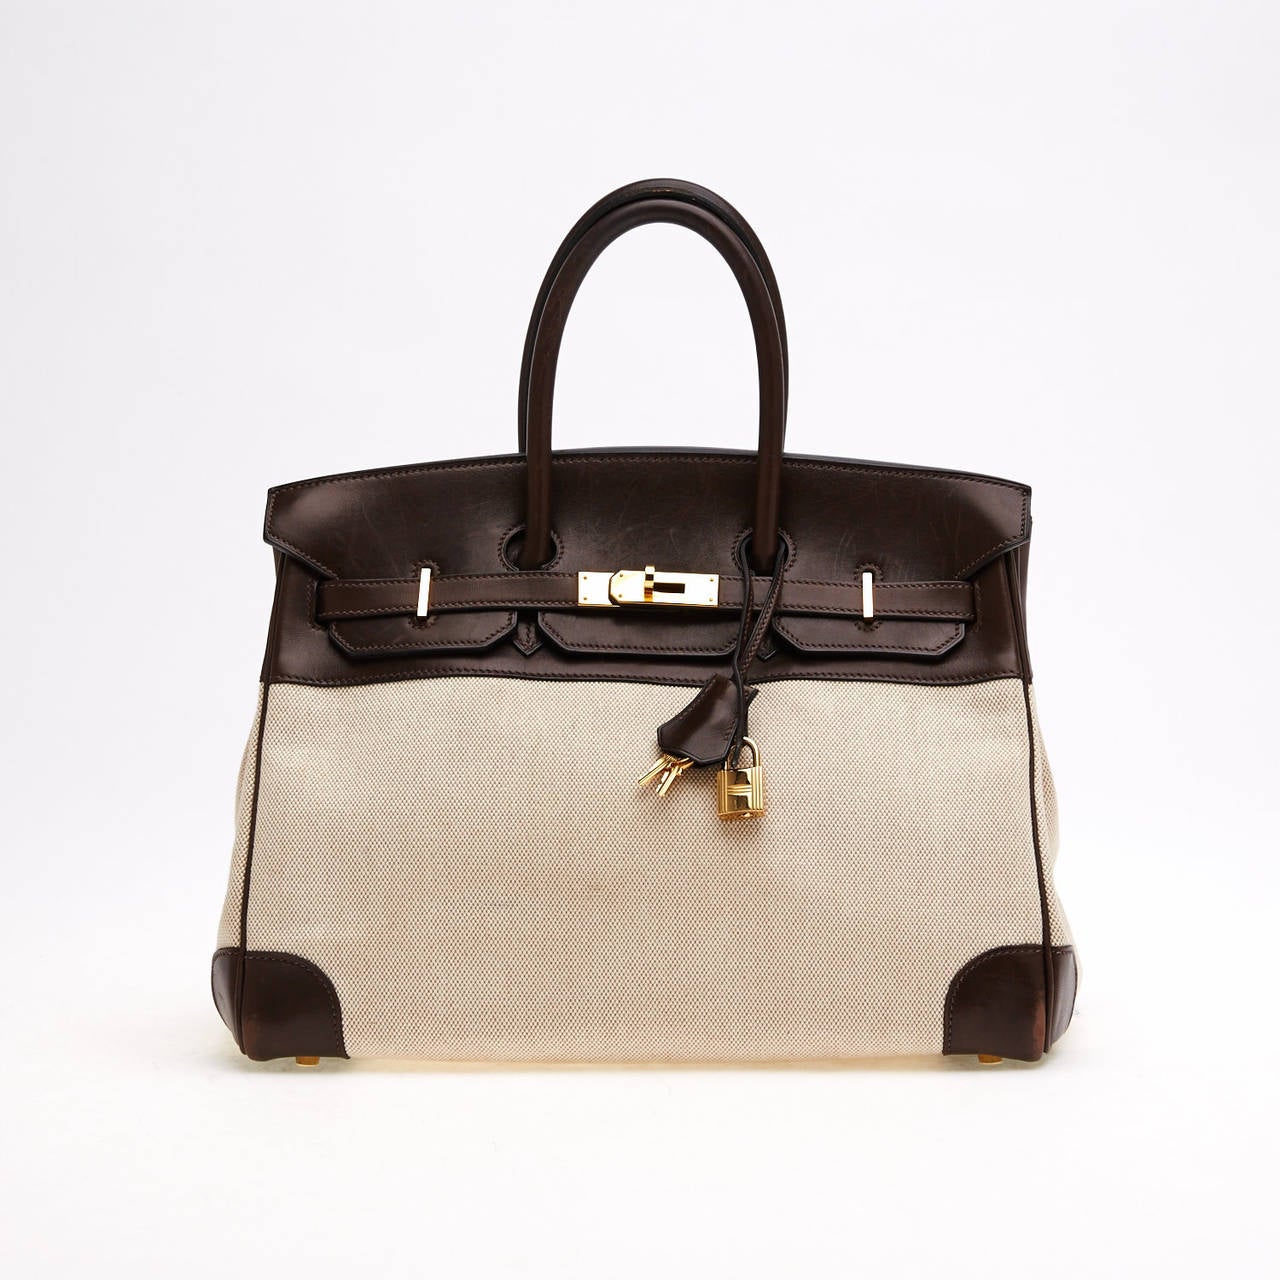 This authentic Hermes Birkin Leather and Toile in size 35cm is quite distinct yet understated. It is constructed with a Ebene chocolate brown leather trim and a Natural toile body. This contrasting design gives a new approach to the classic style